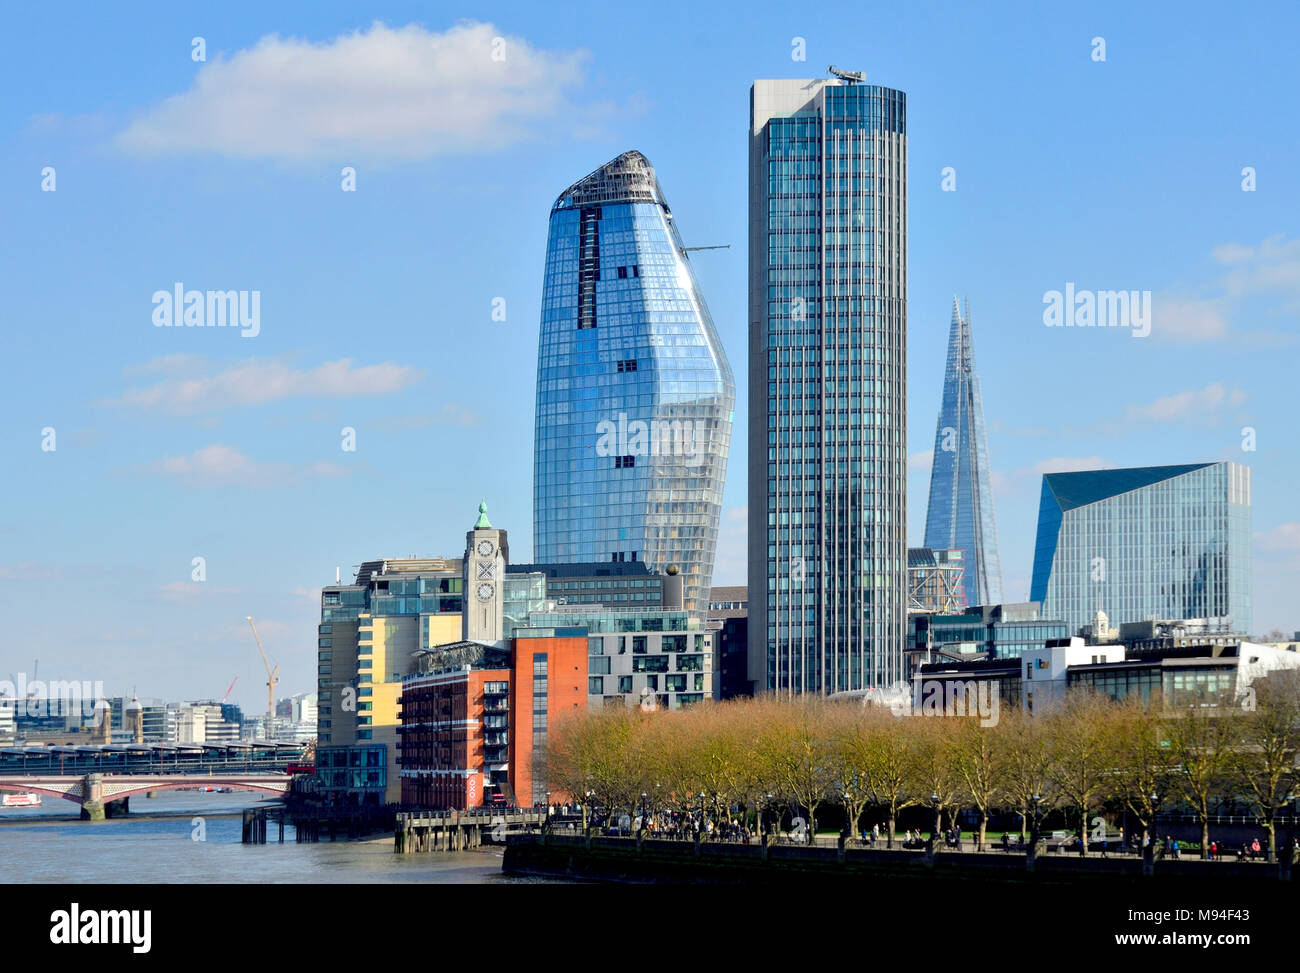 London, England, UK. New buildings in the Southwark area - One ...